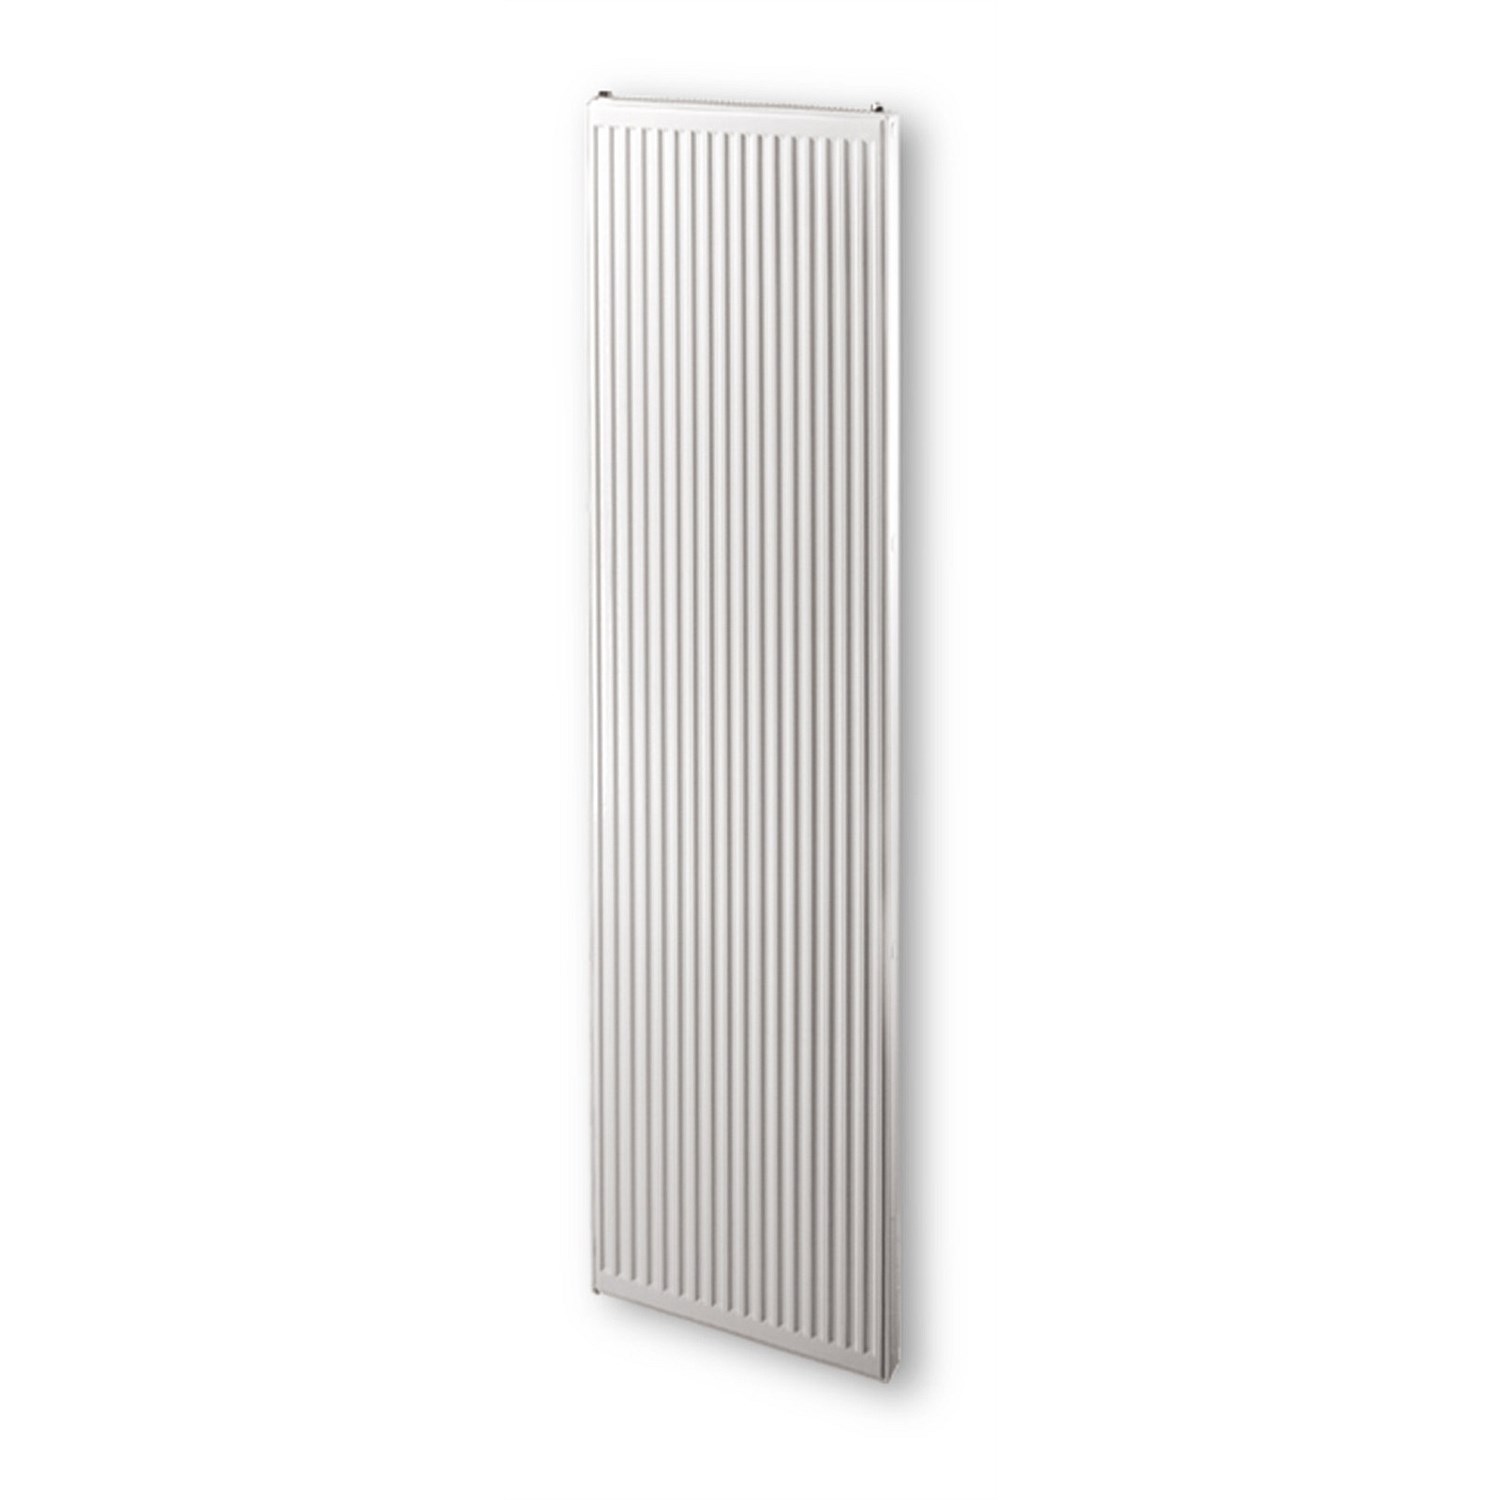 Central Heating - Delonghi Vertical Type 22 Radiator